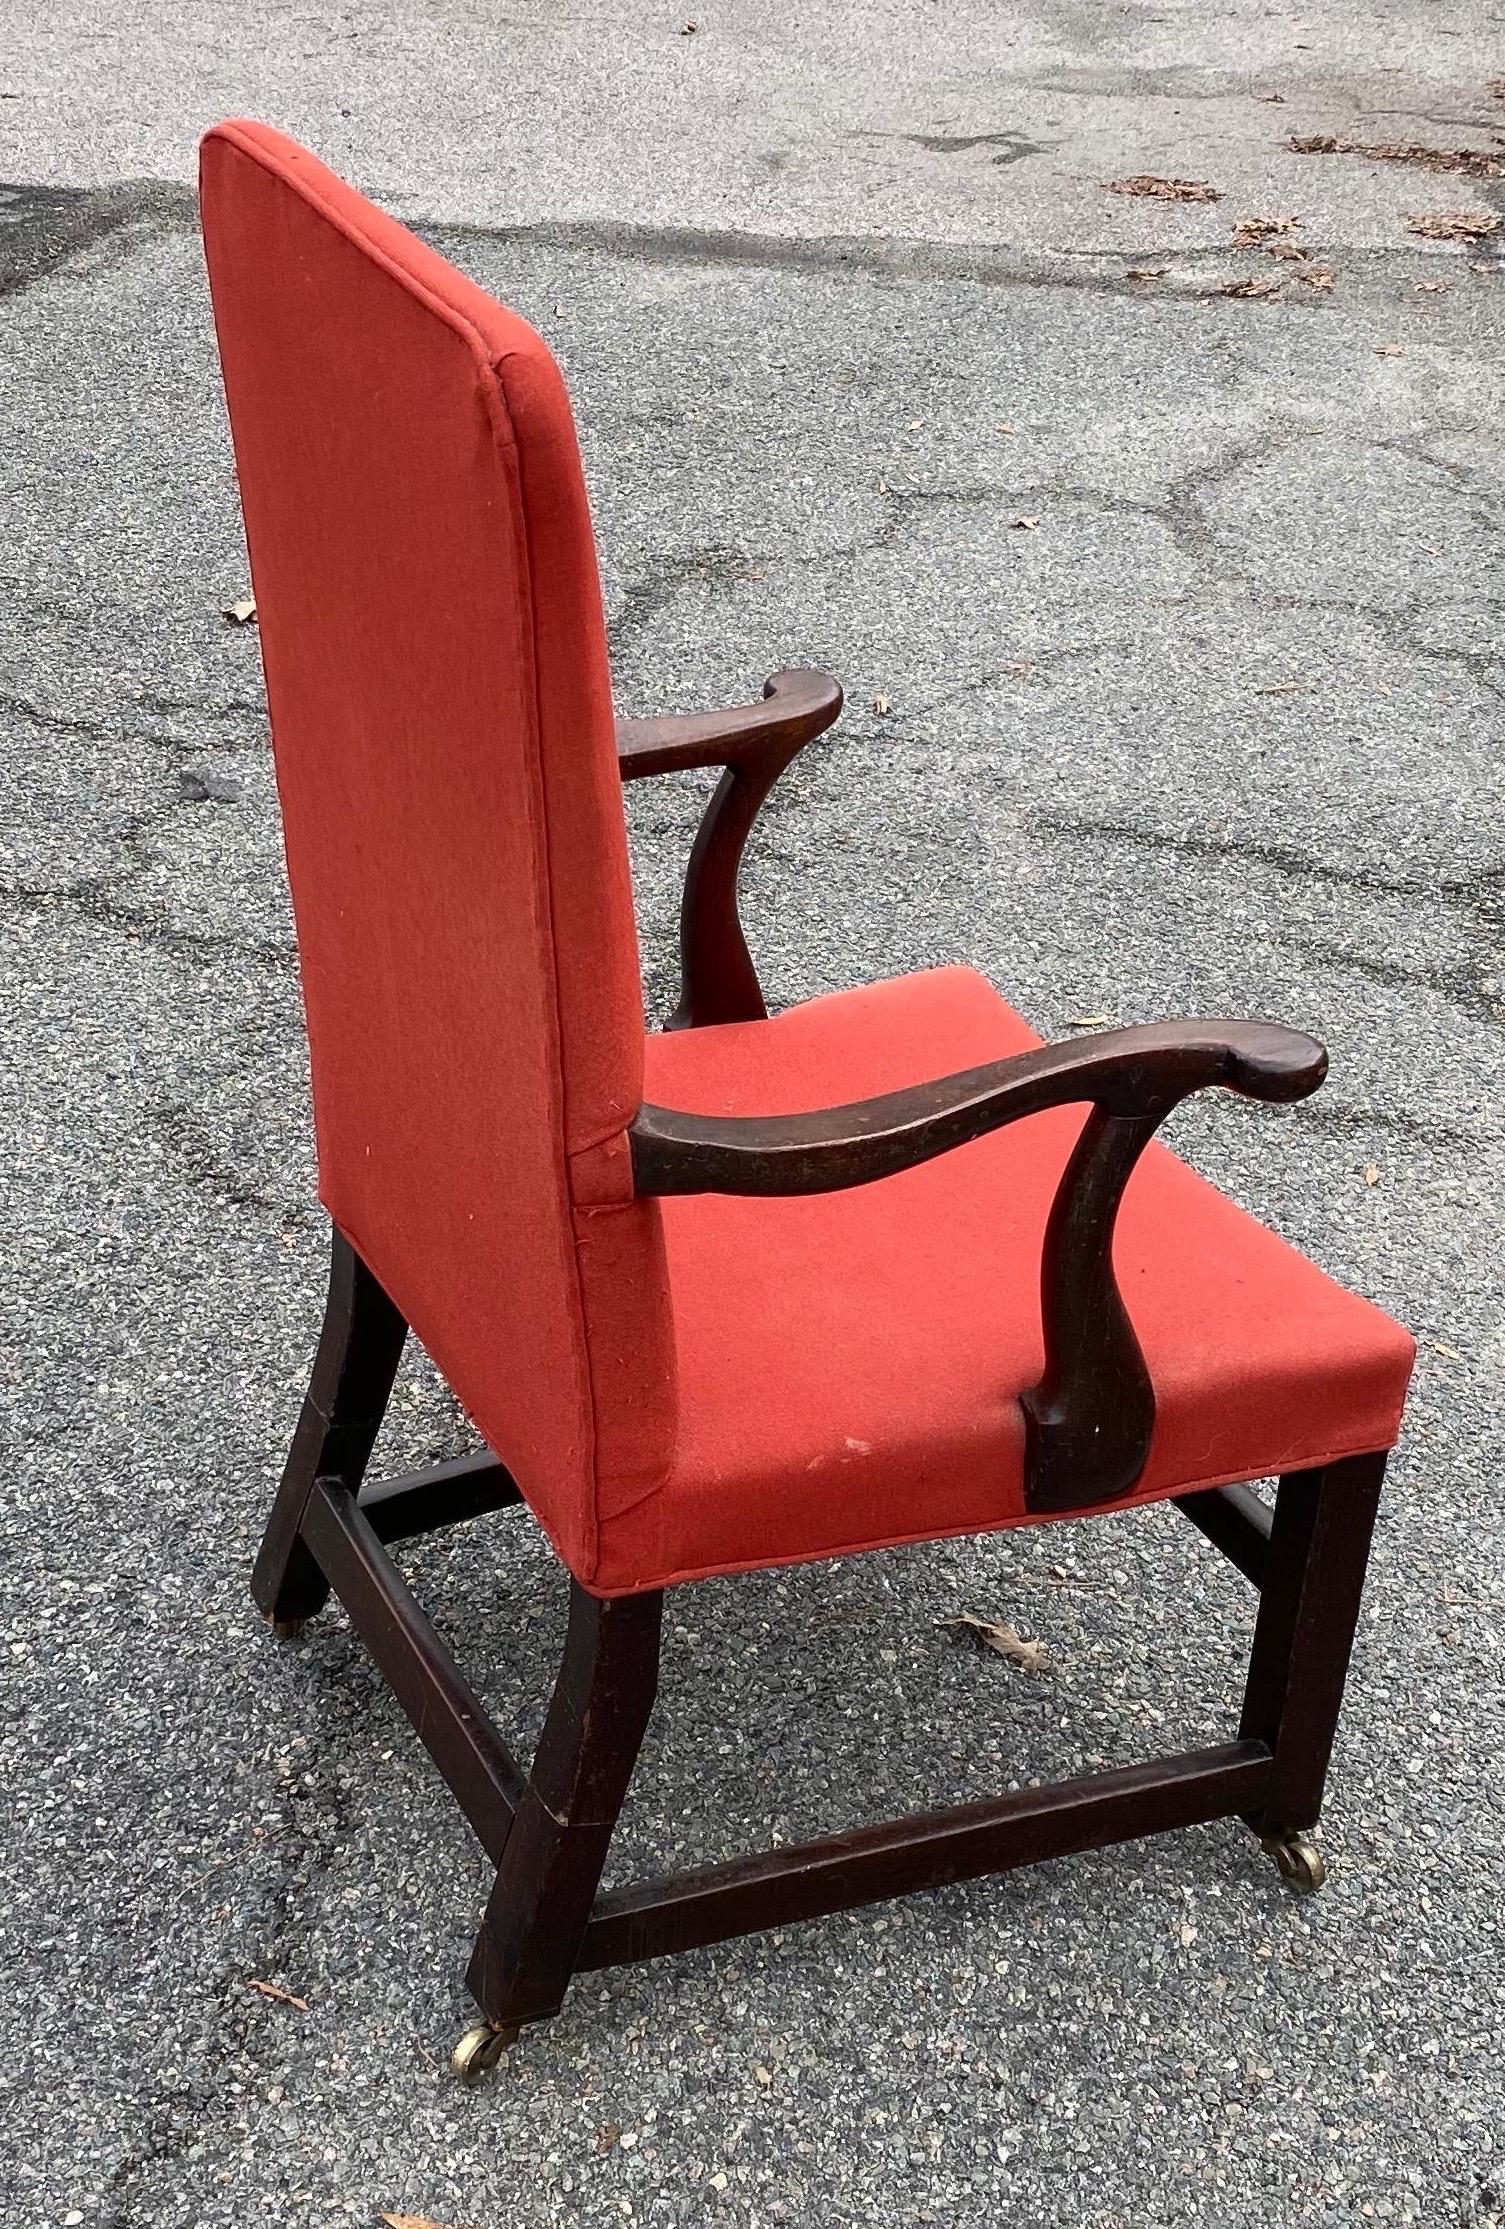 19th Century English Mahogany Armchair In Good Condition For Sale In Charleston, SC